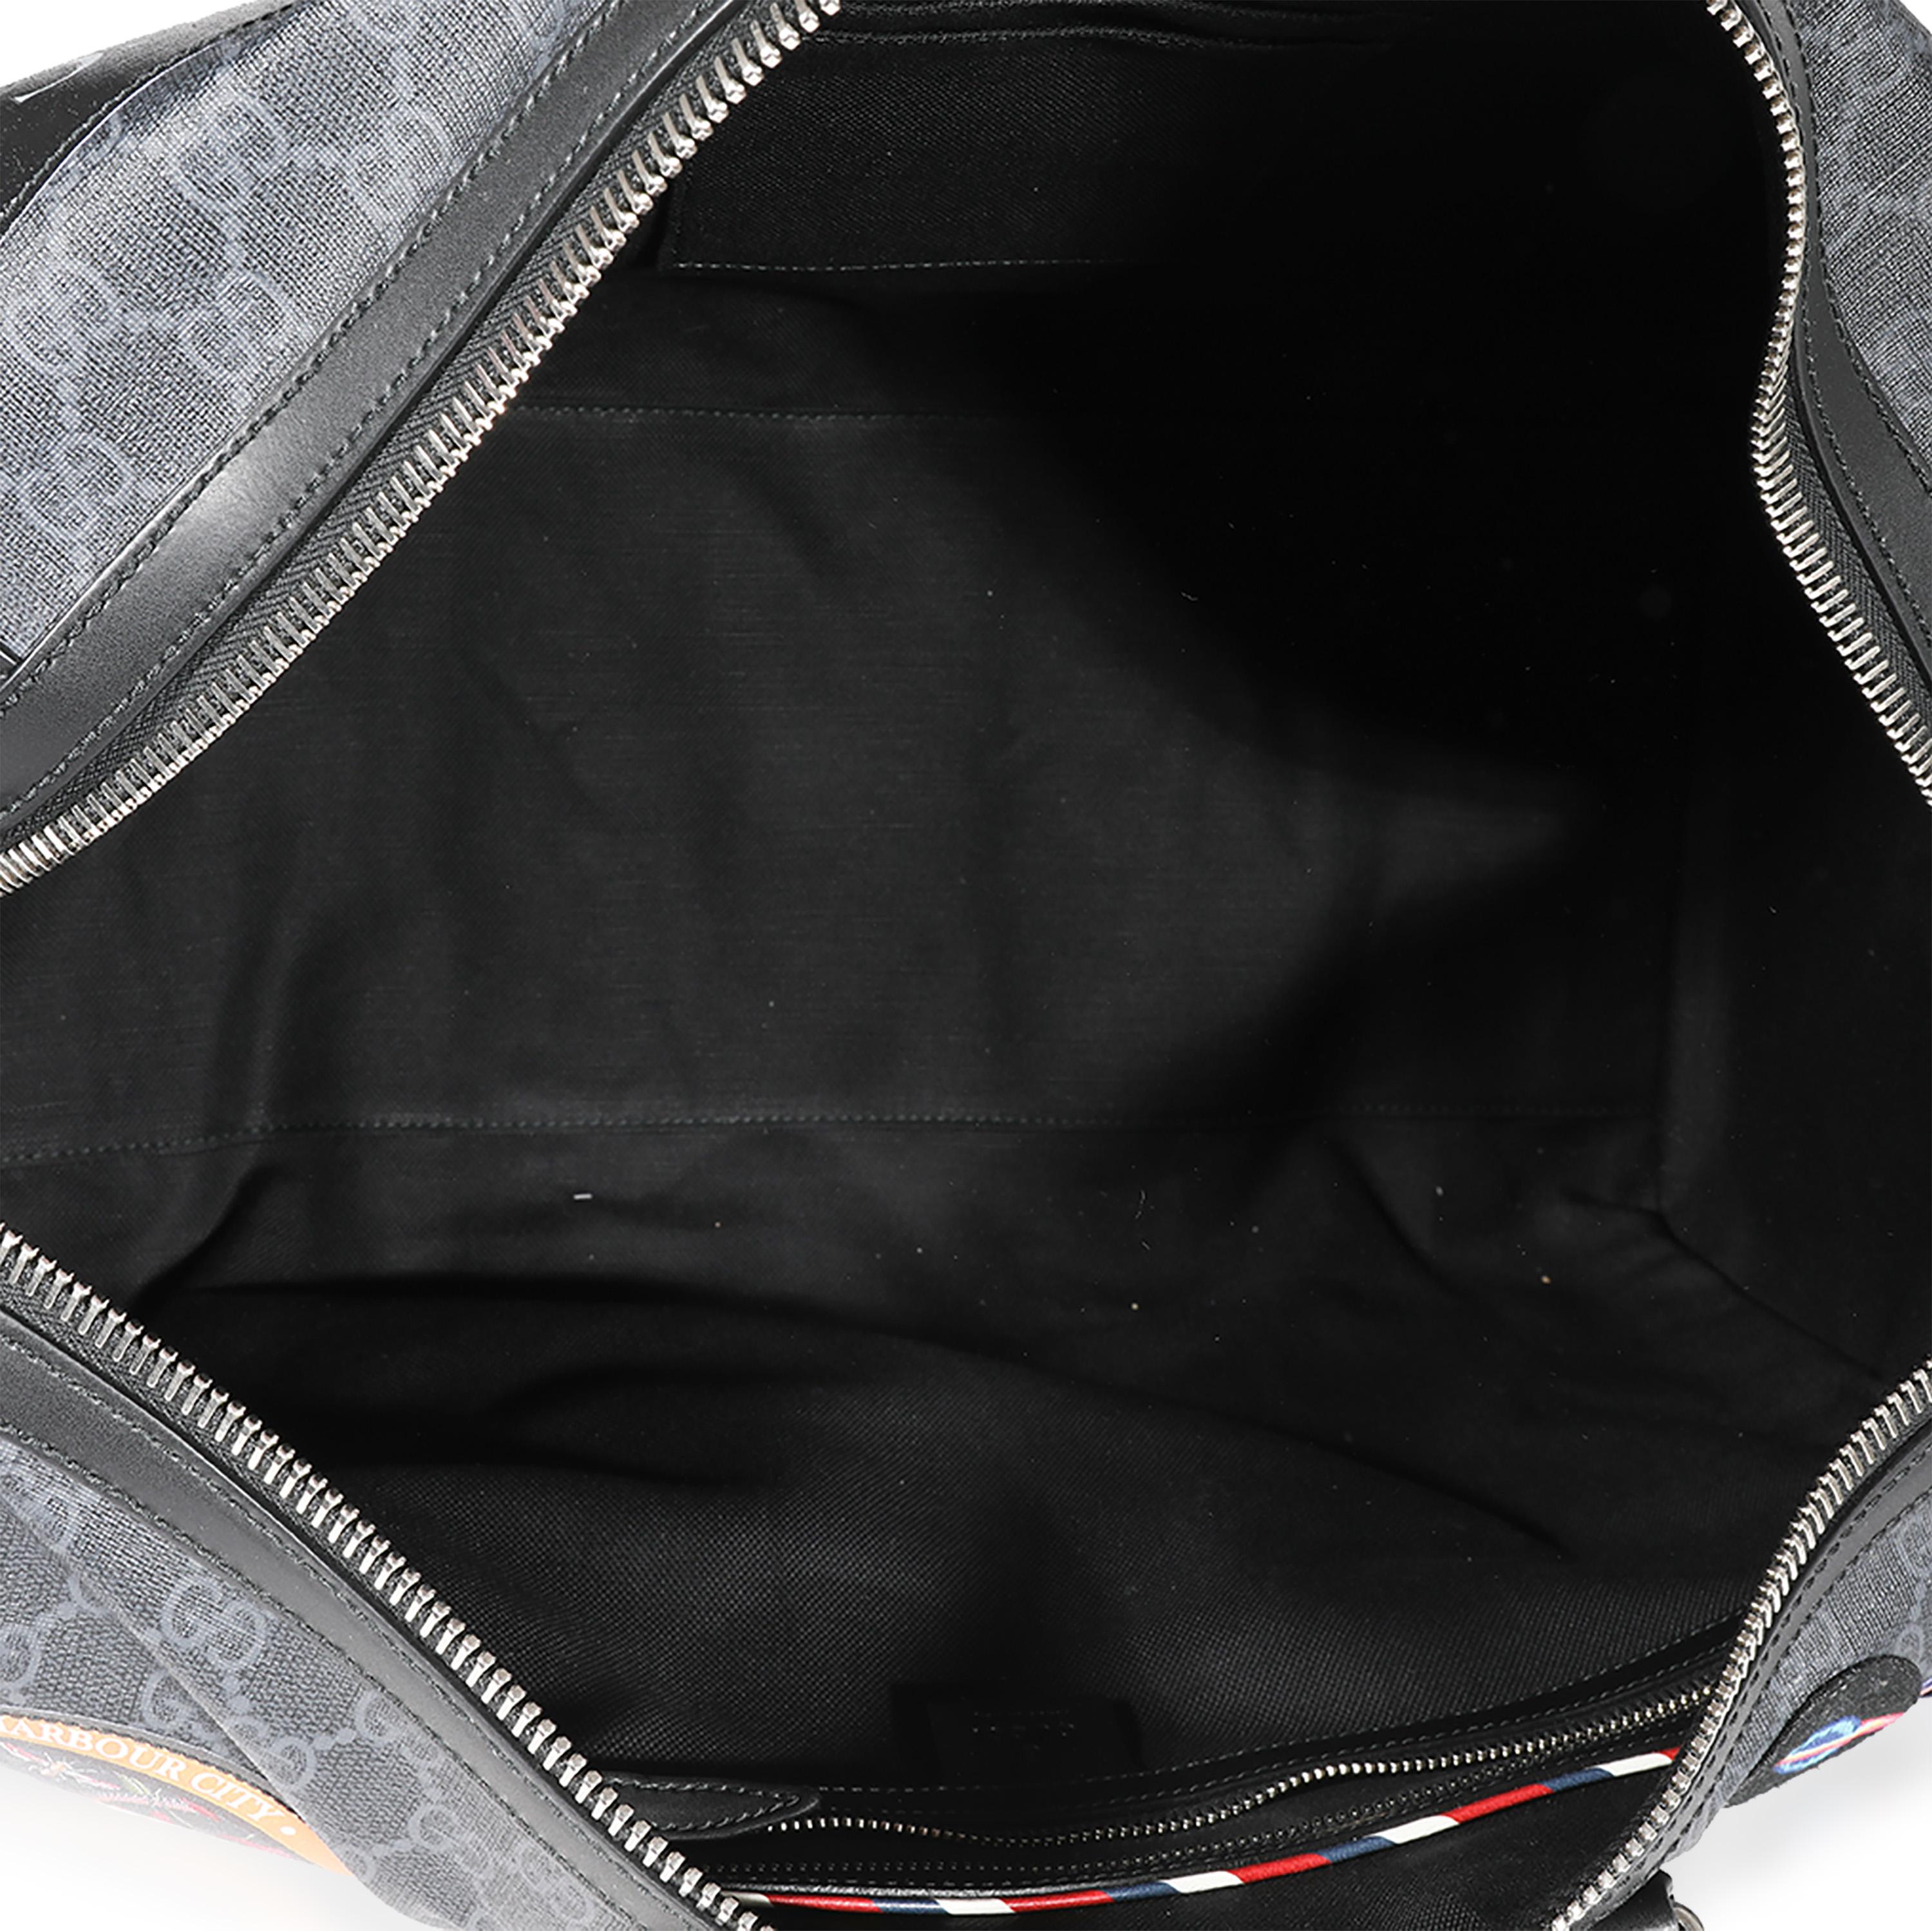 Listing Title: Gucci Black GG Supreme Canvas Night Courrier Carry-On-Duffle
SKU: 122555
Condition: Pre-owned 
Handbag Condition: Very Good
Condition Comments: Very Good Condition. Scuffing at exterior leather. Faint scratching at hardware. Light